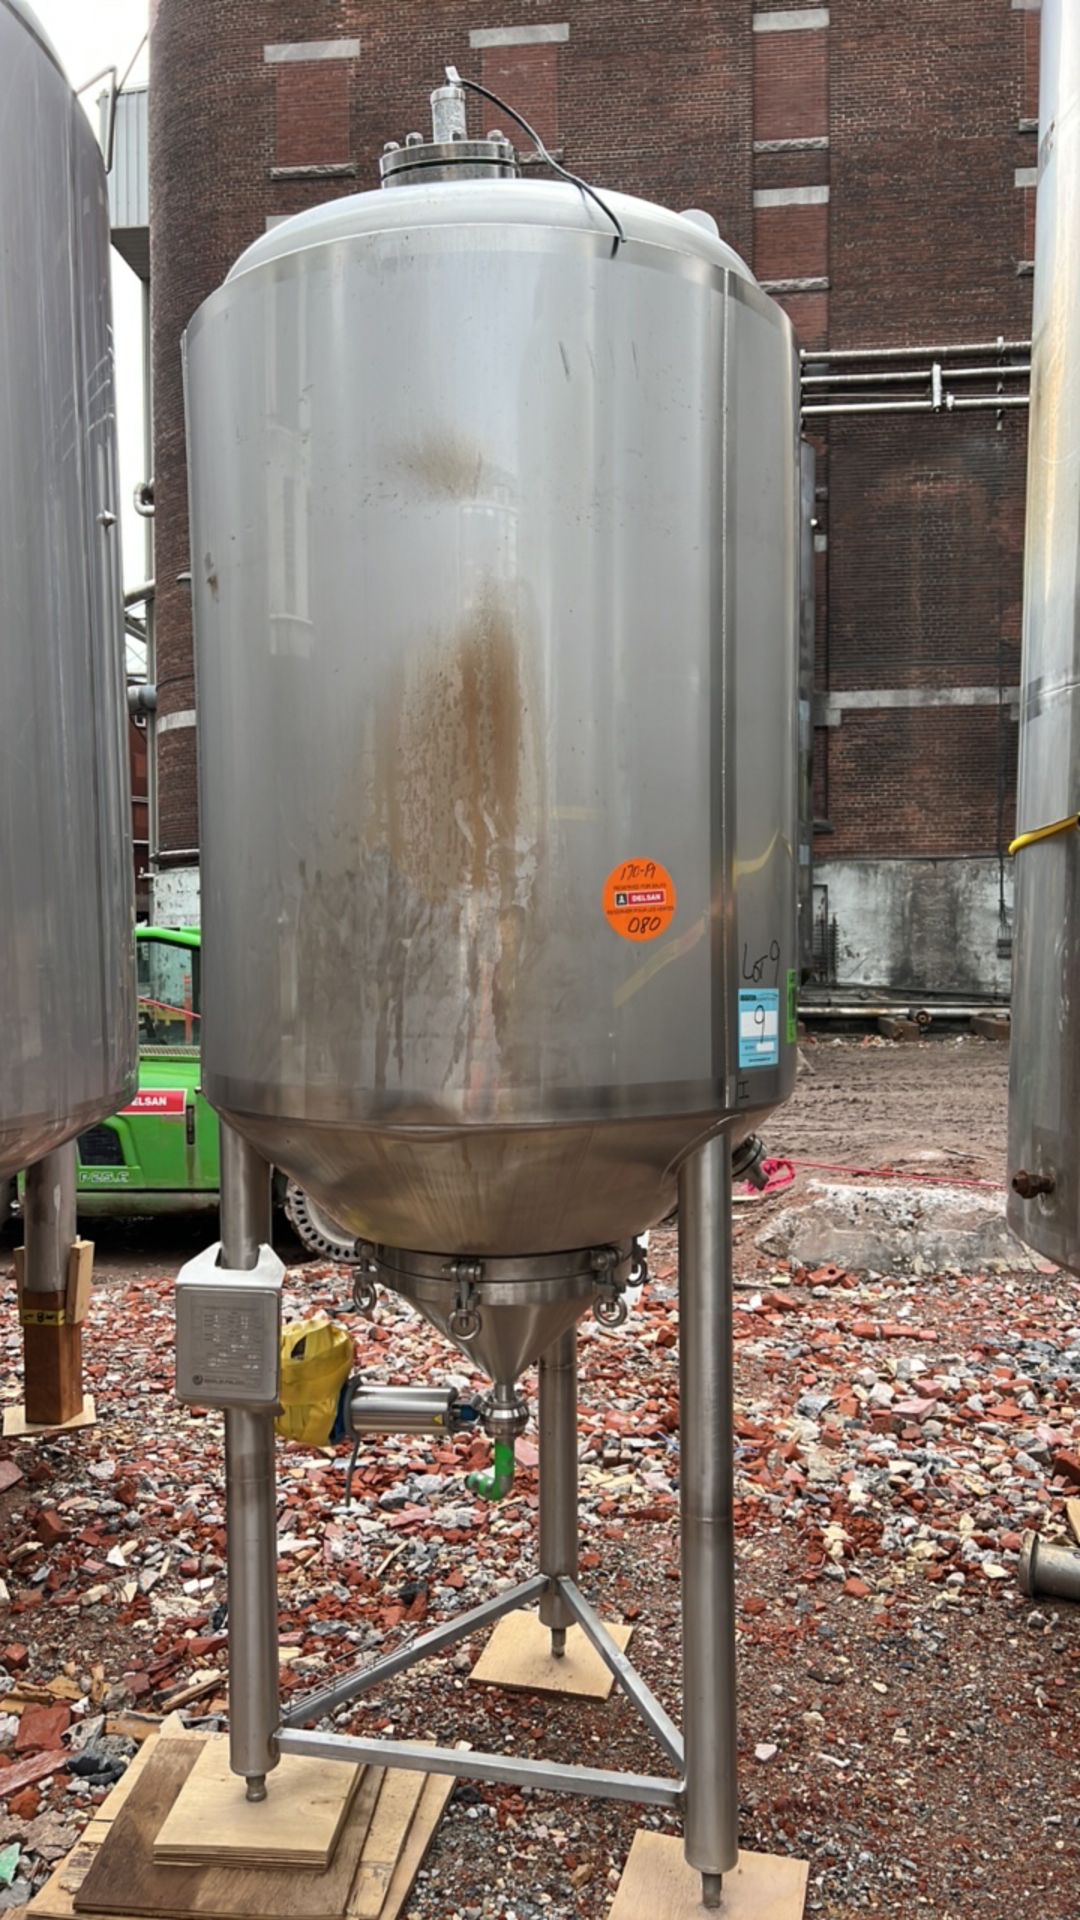 326 Gallon / 1235 Litre BERLIE-FALCO Vertical Jacketed Pressure Tank 304L Stainless Steel, ~40" dia